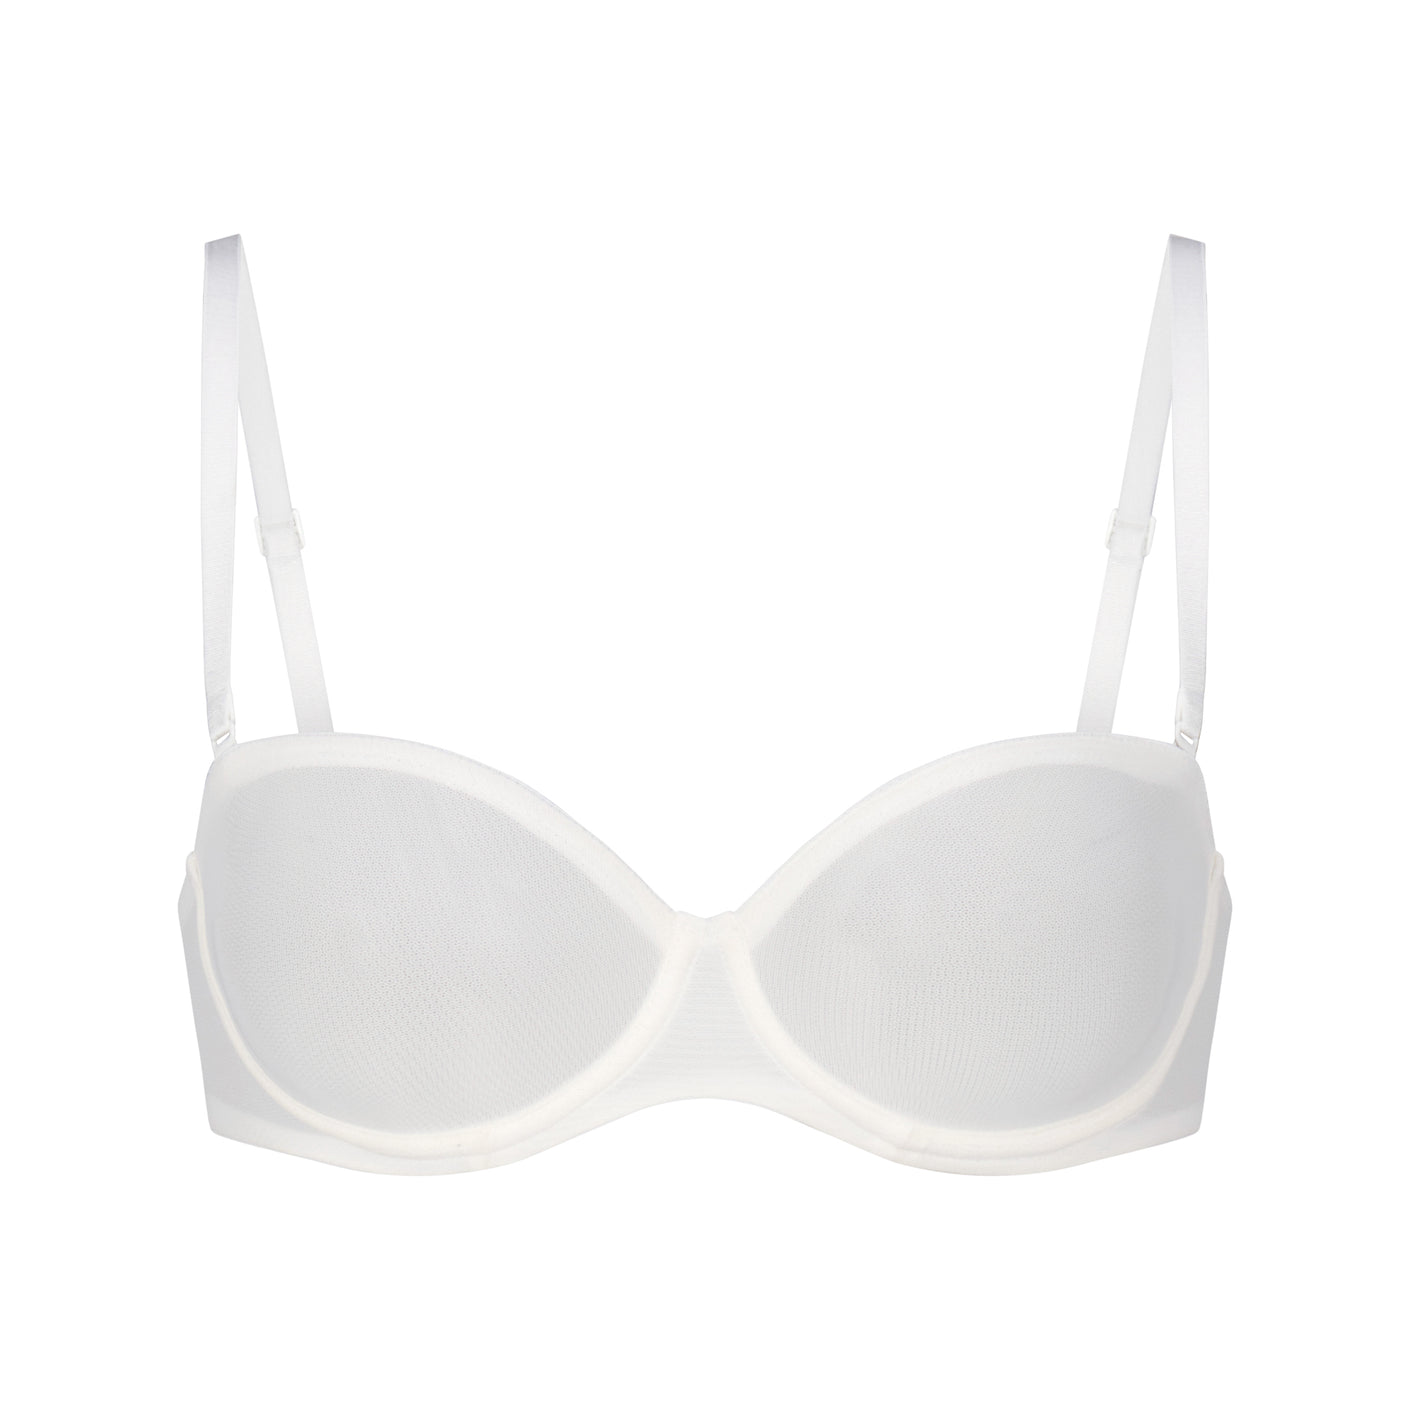 SKIMS Strapless Bra NWT 34C Tan Size 34 C - $30 (42% Off Retail) New With  Tags - From Ali